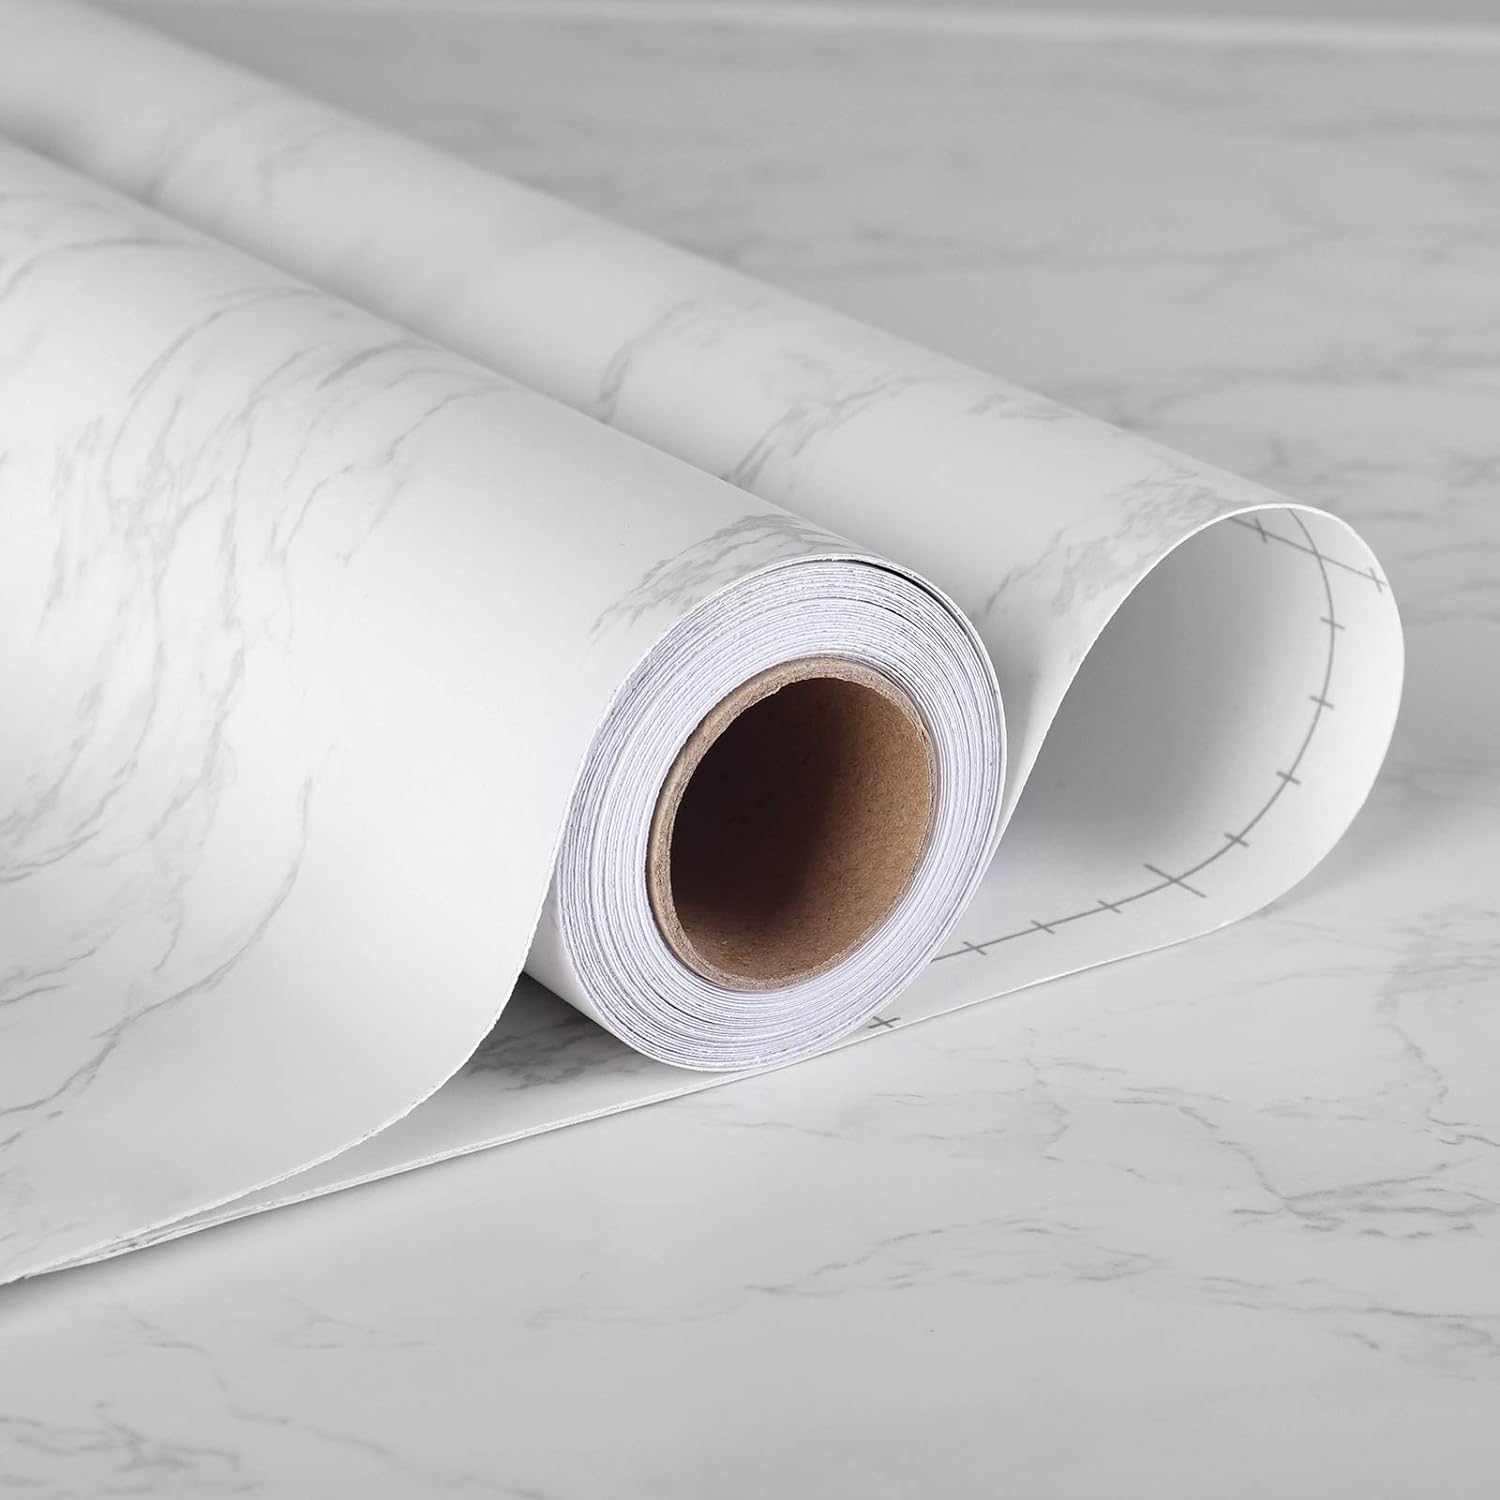 Stickyart 24x160 Thick White Marble Contact Paper for Bathroom Countertops Waterproof Granite Look Marble Effect Interior Film Vinyl Self Adhesive Removable Marble Contact Paper for Countertops